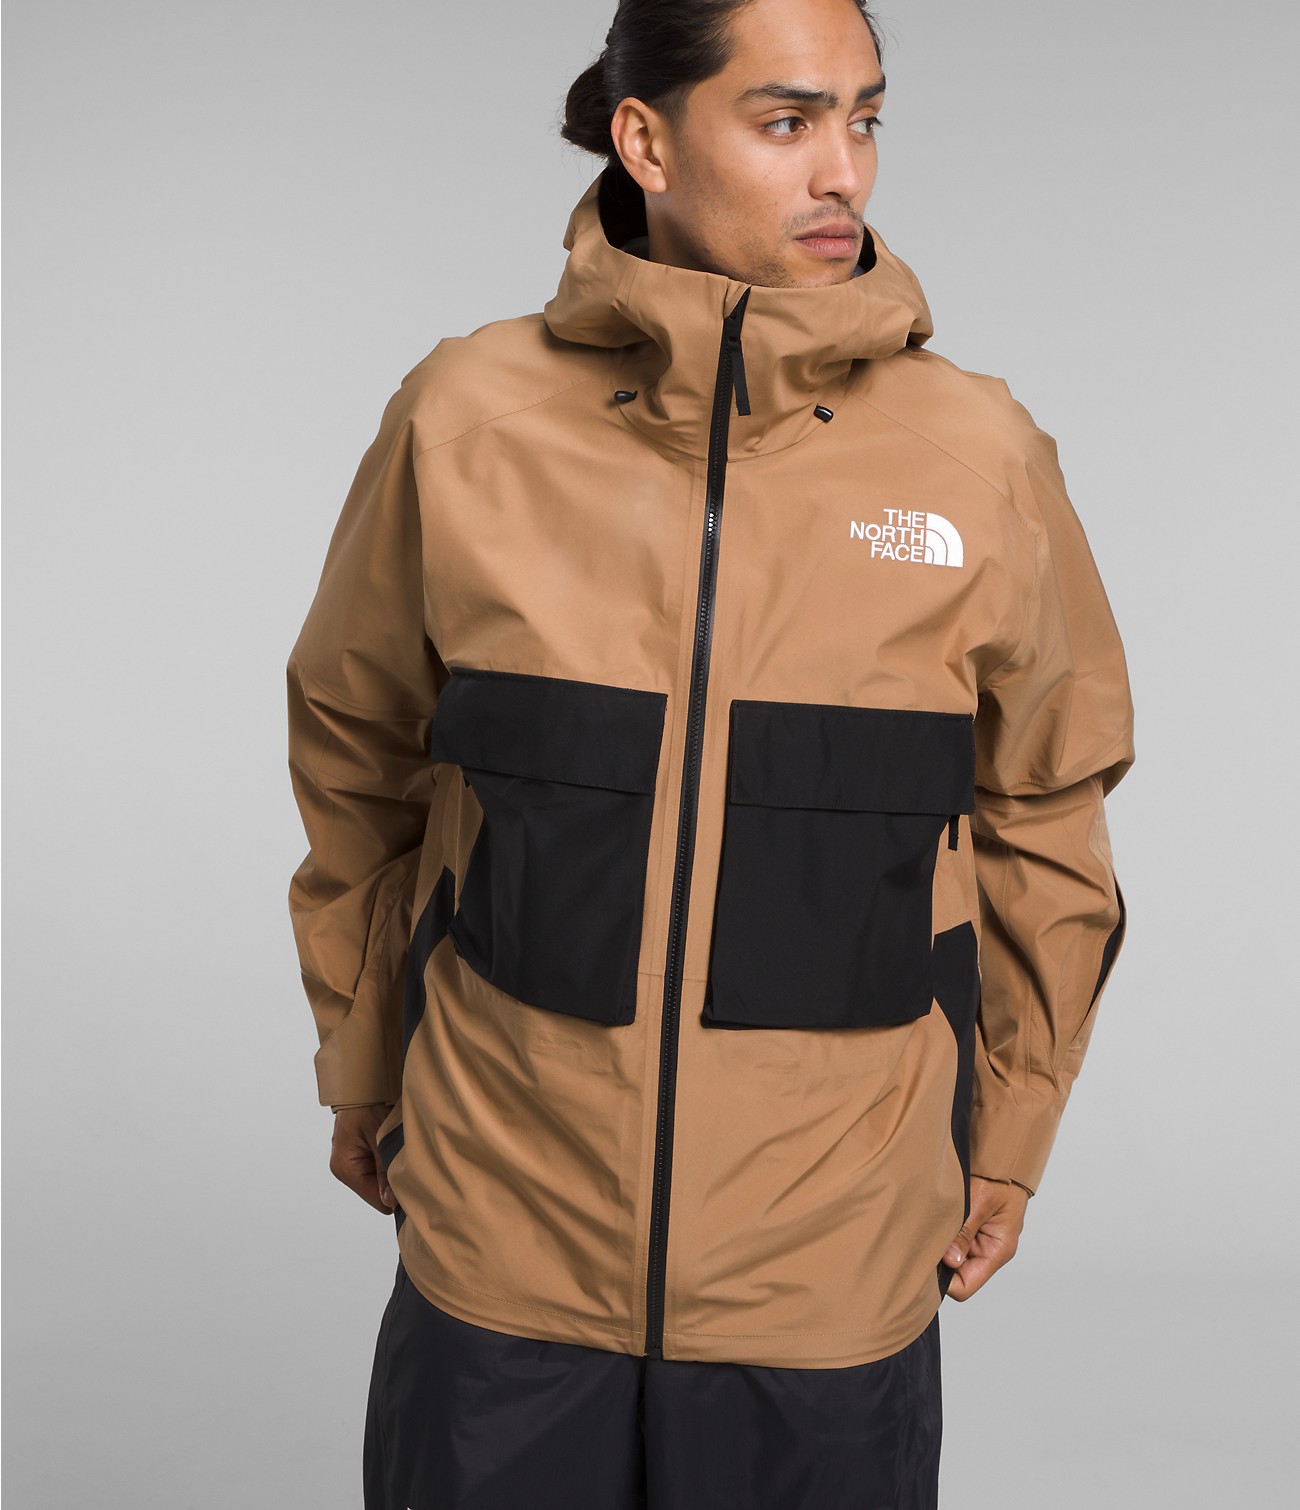 Men’s Sidecut GORE-TEX® Jacket | The North Face